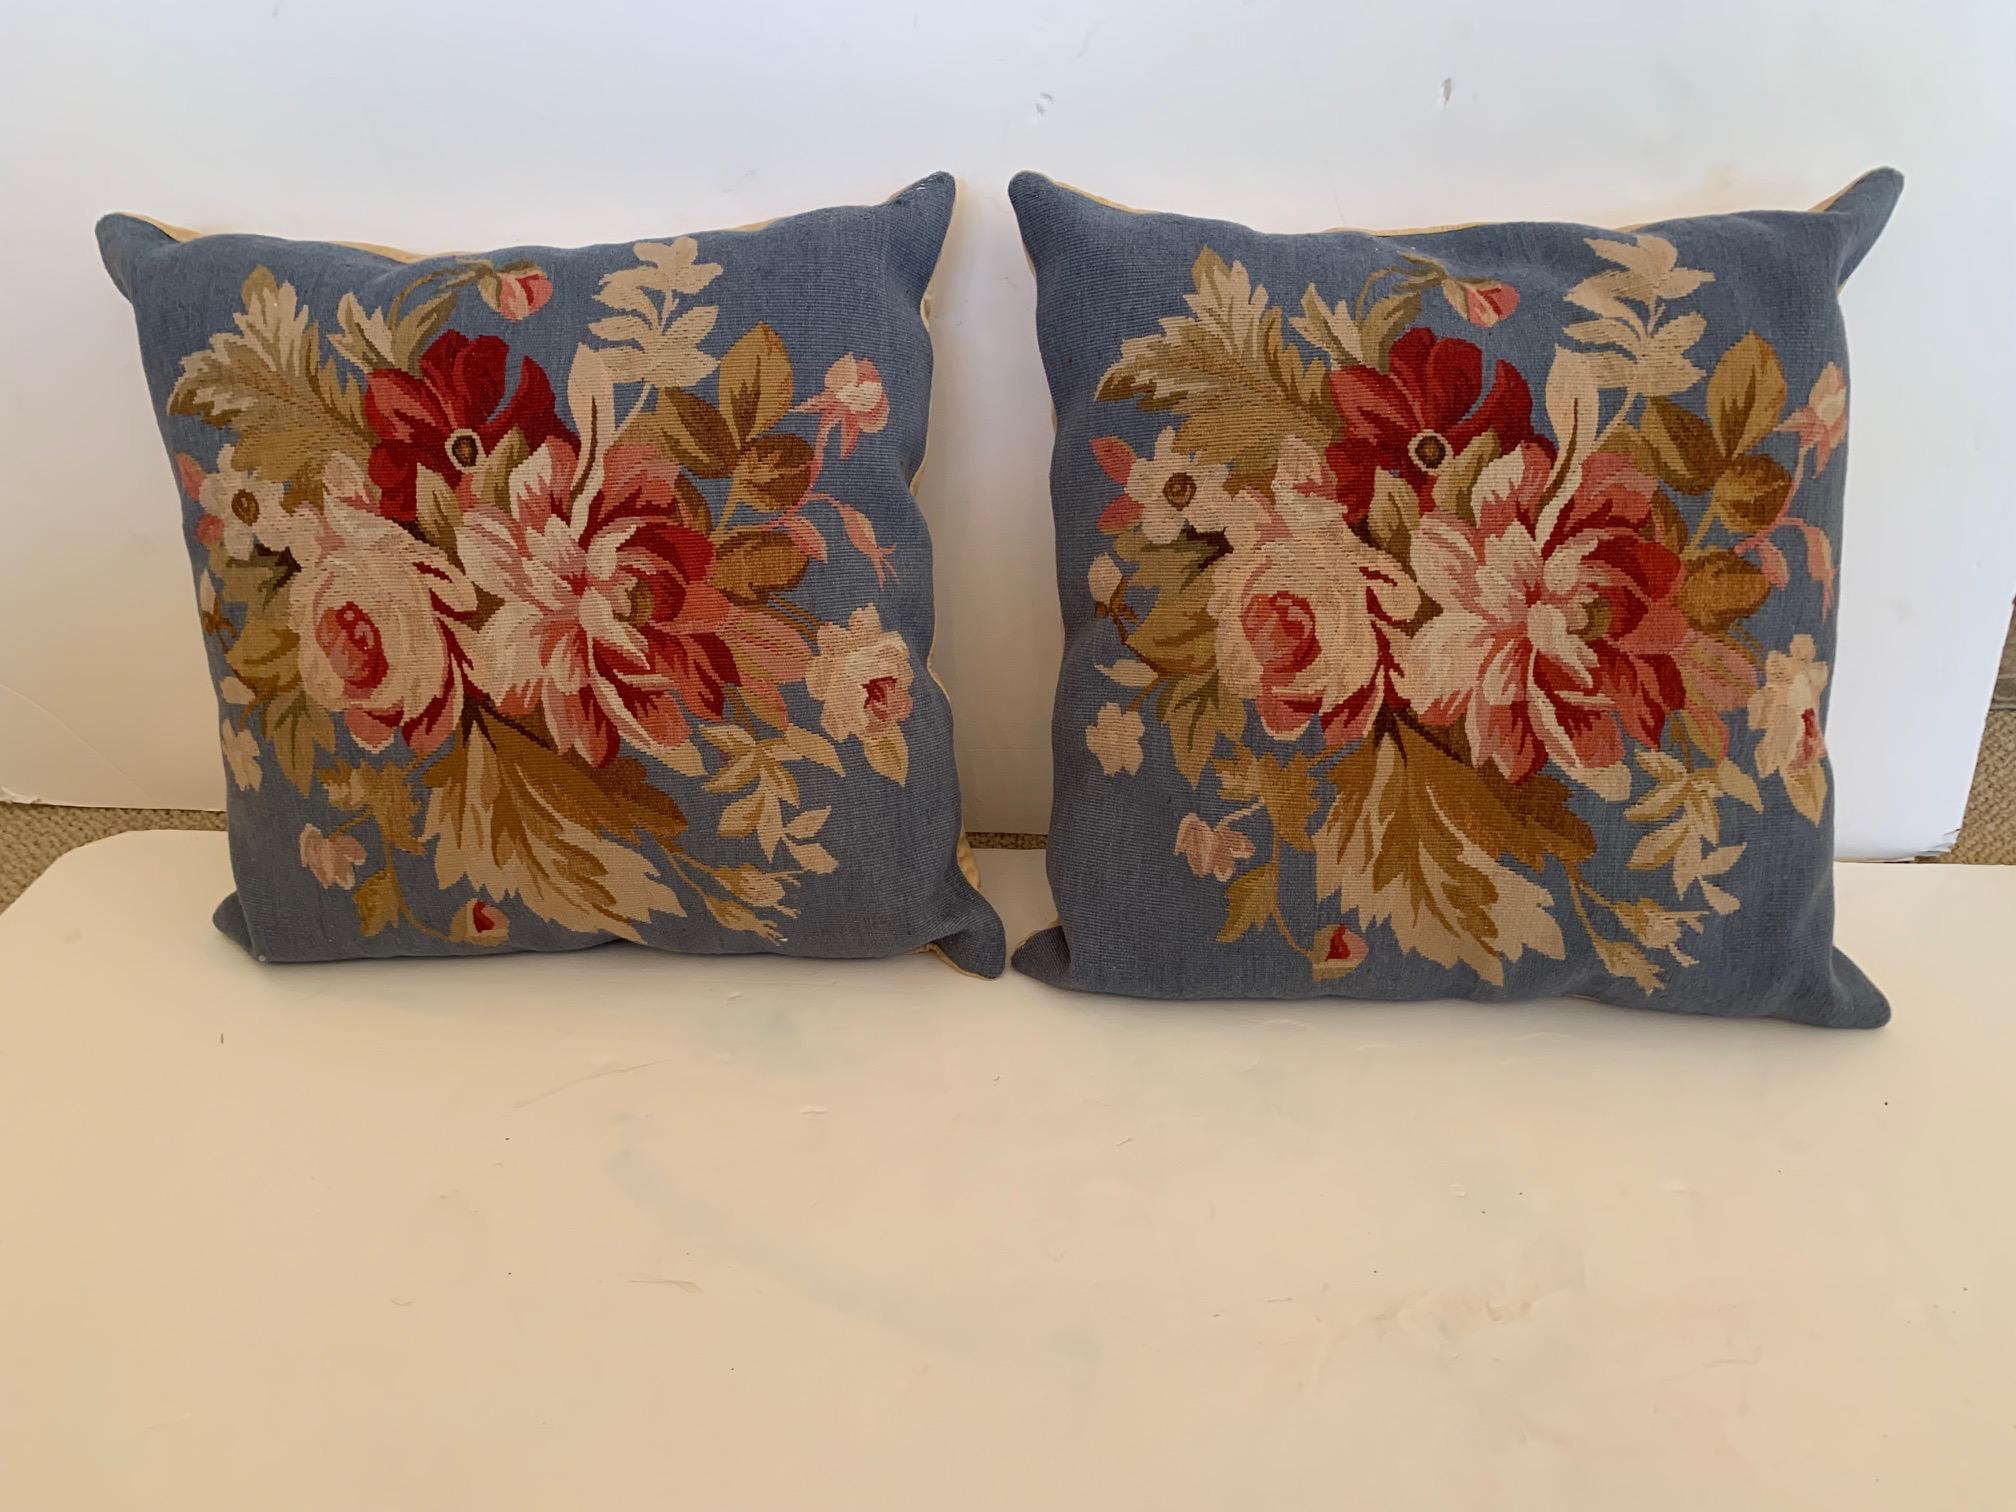 Lovely pair of vintage hand made needlepoint square pillows.